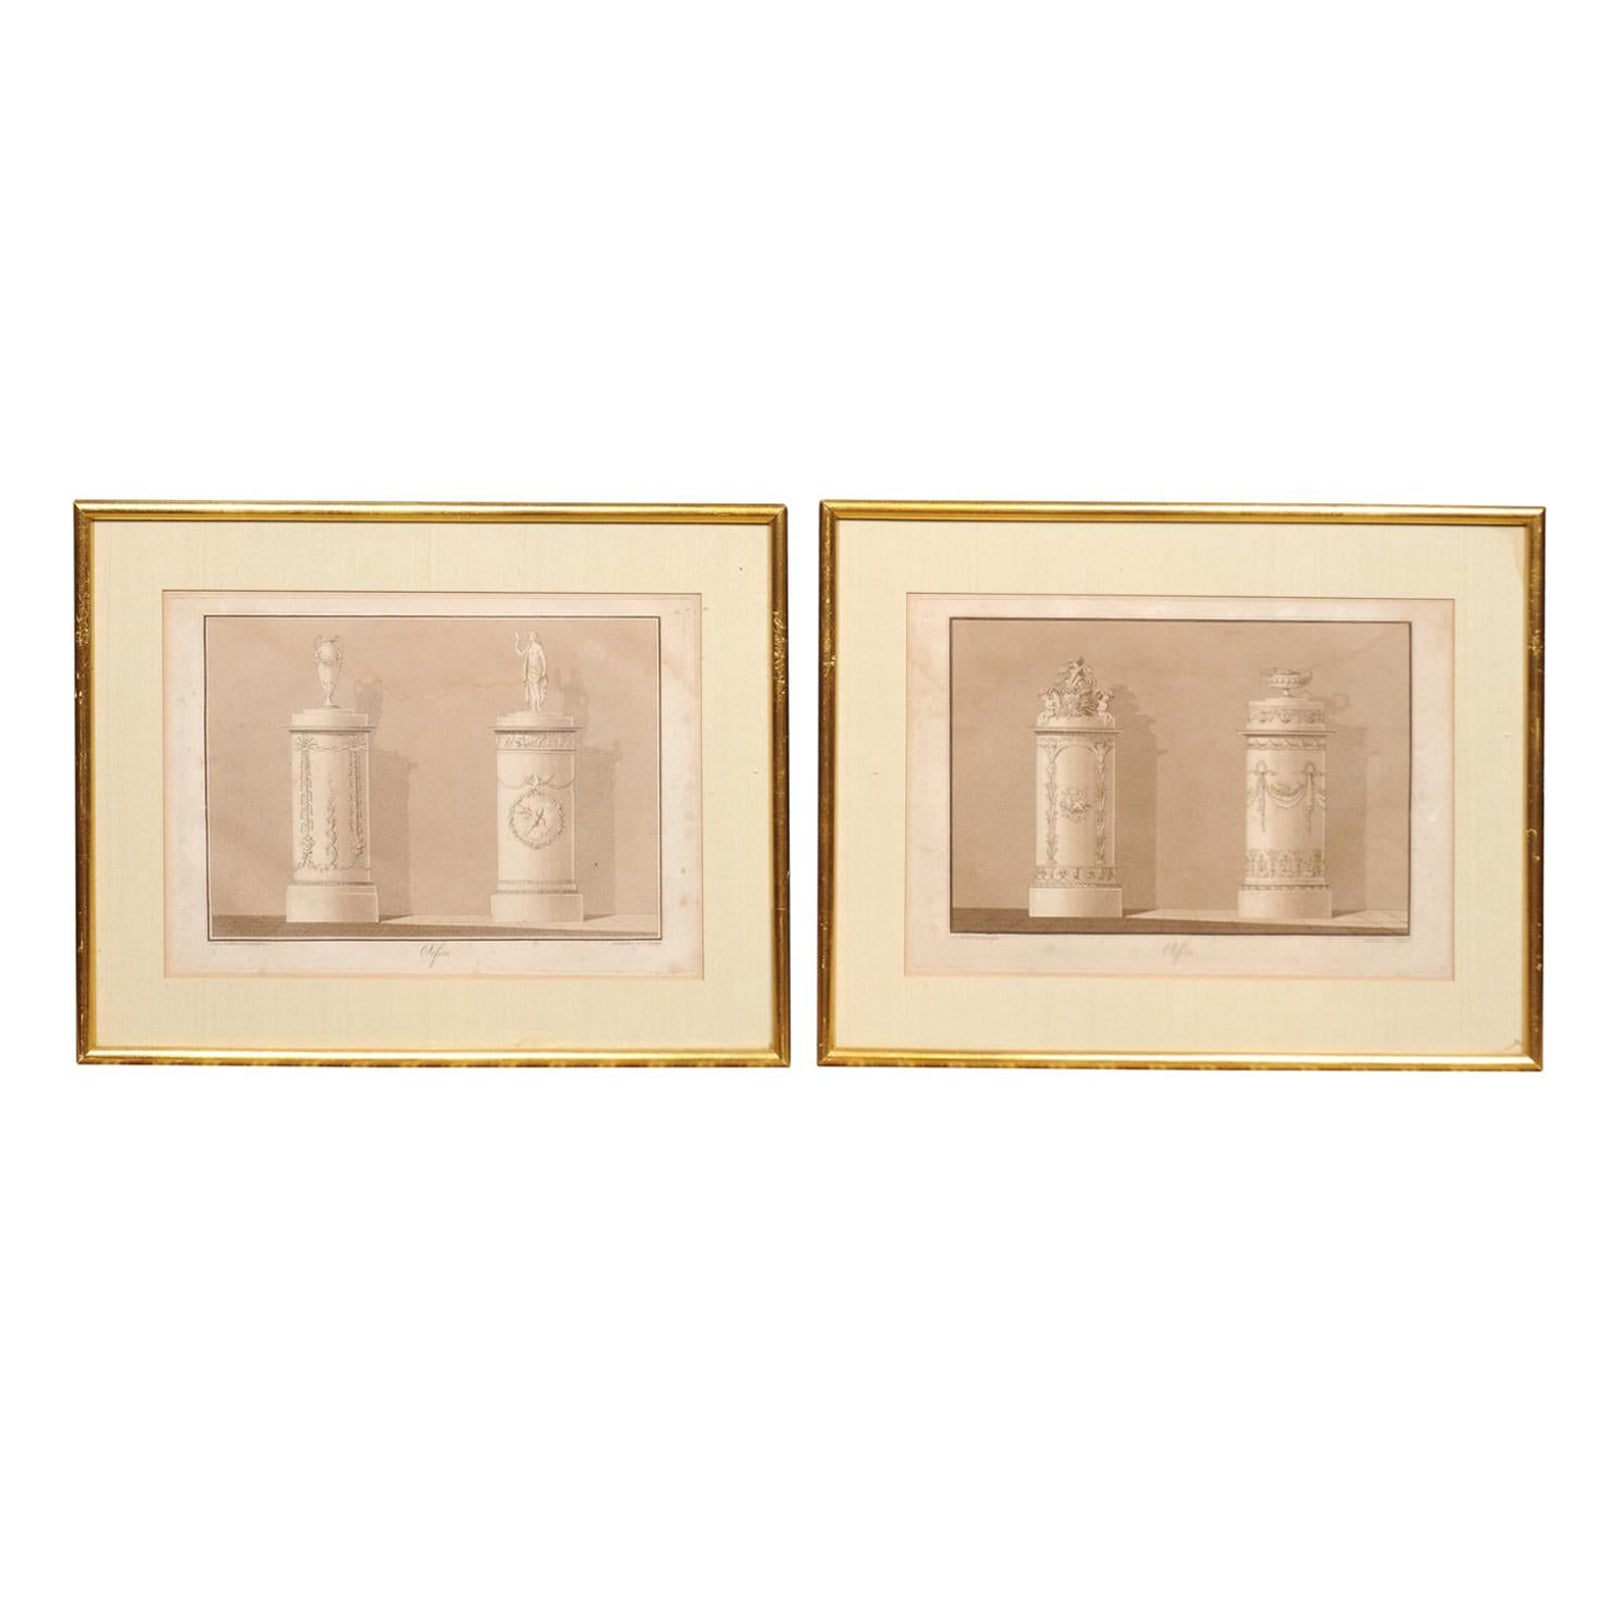 Pair of Gilt Framed Classical Engravings in Sepia Tones, Engraved by J. Spiegl For Sale